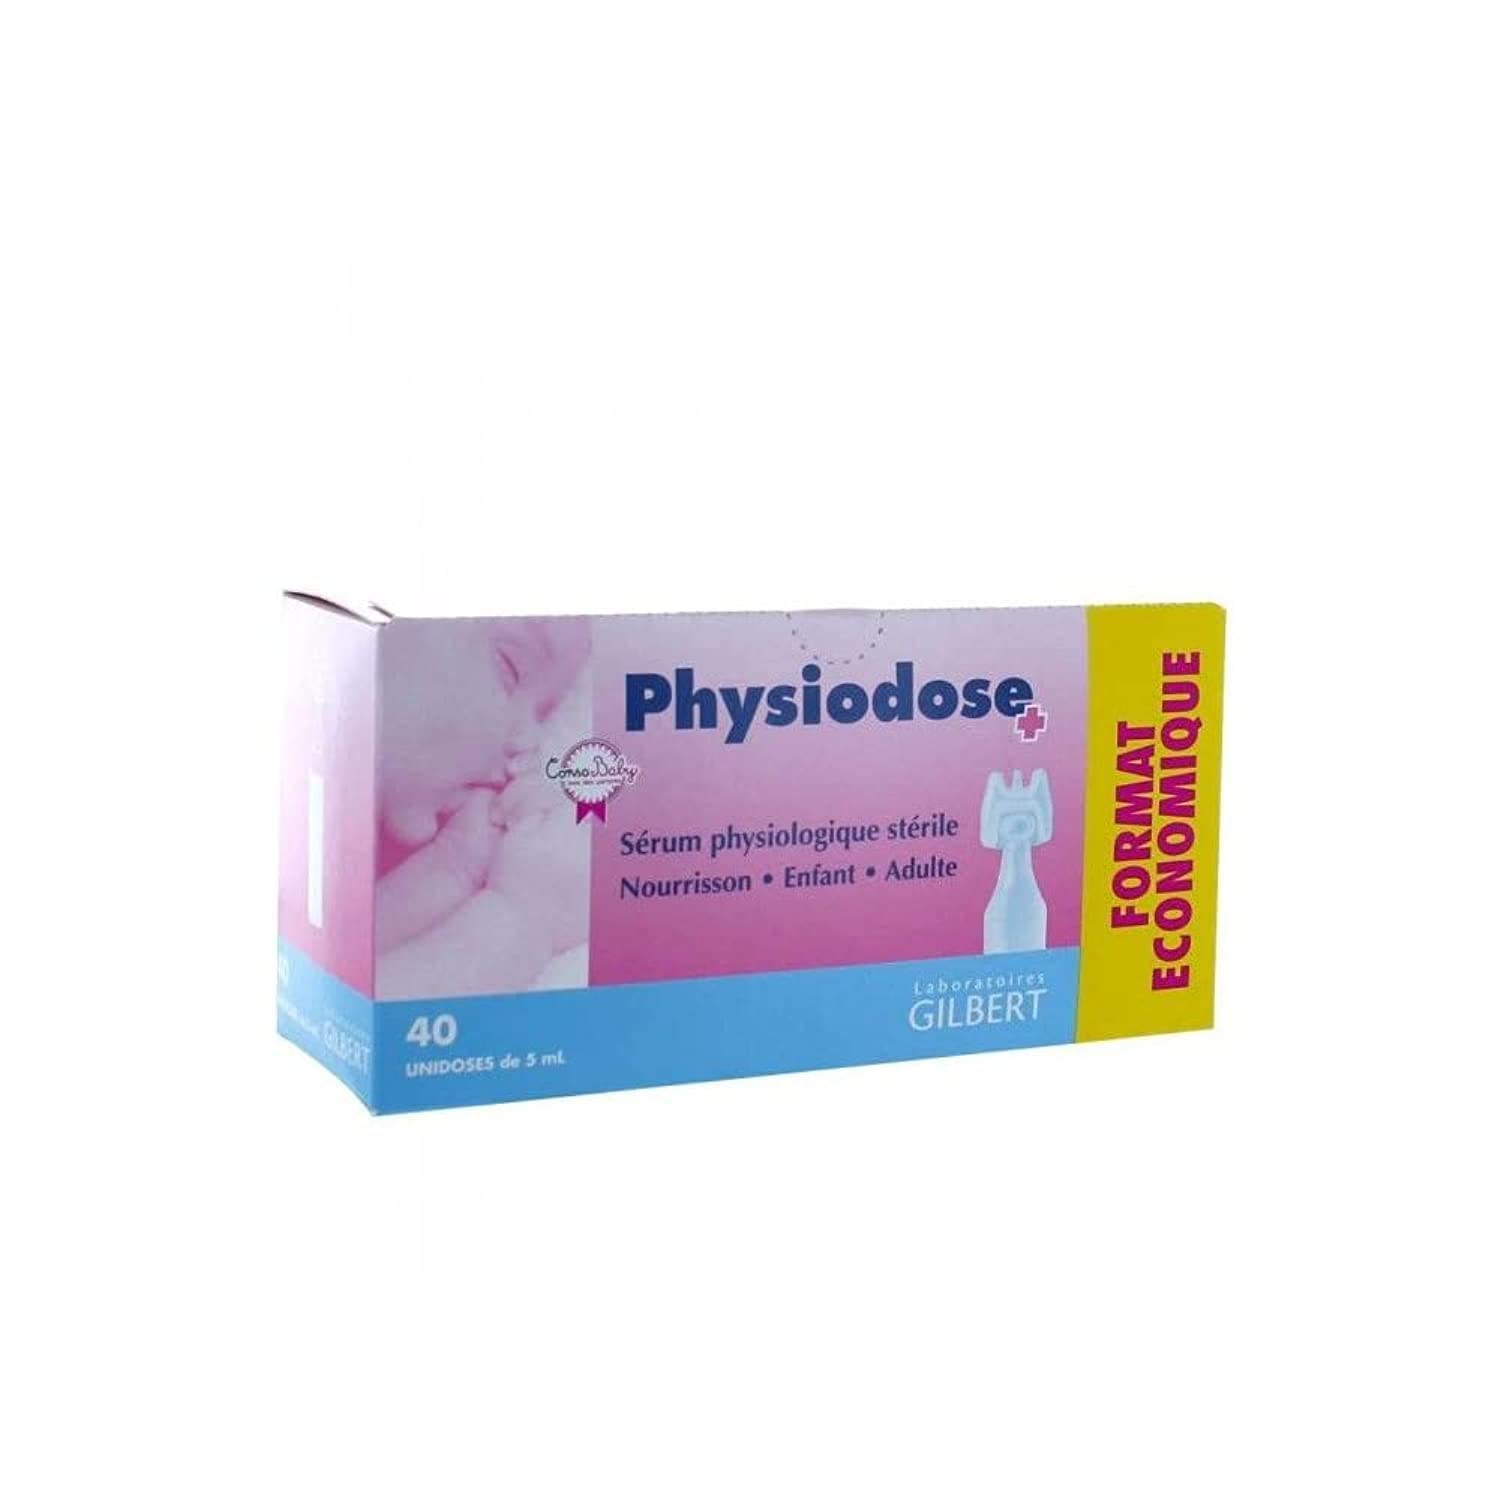  Physiodose Physiological Serum - Box of 40 Single Doses :  Health & Household